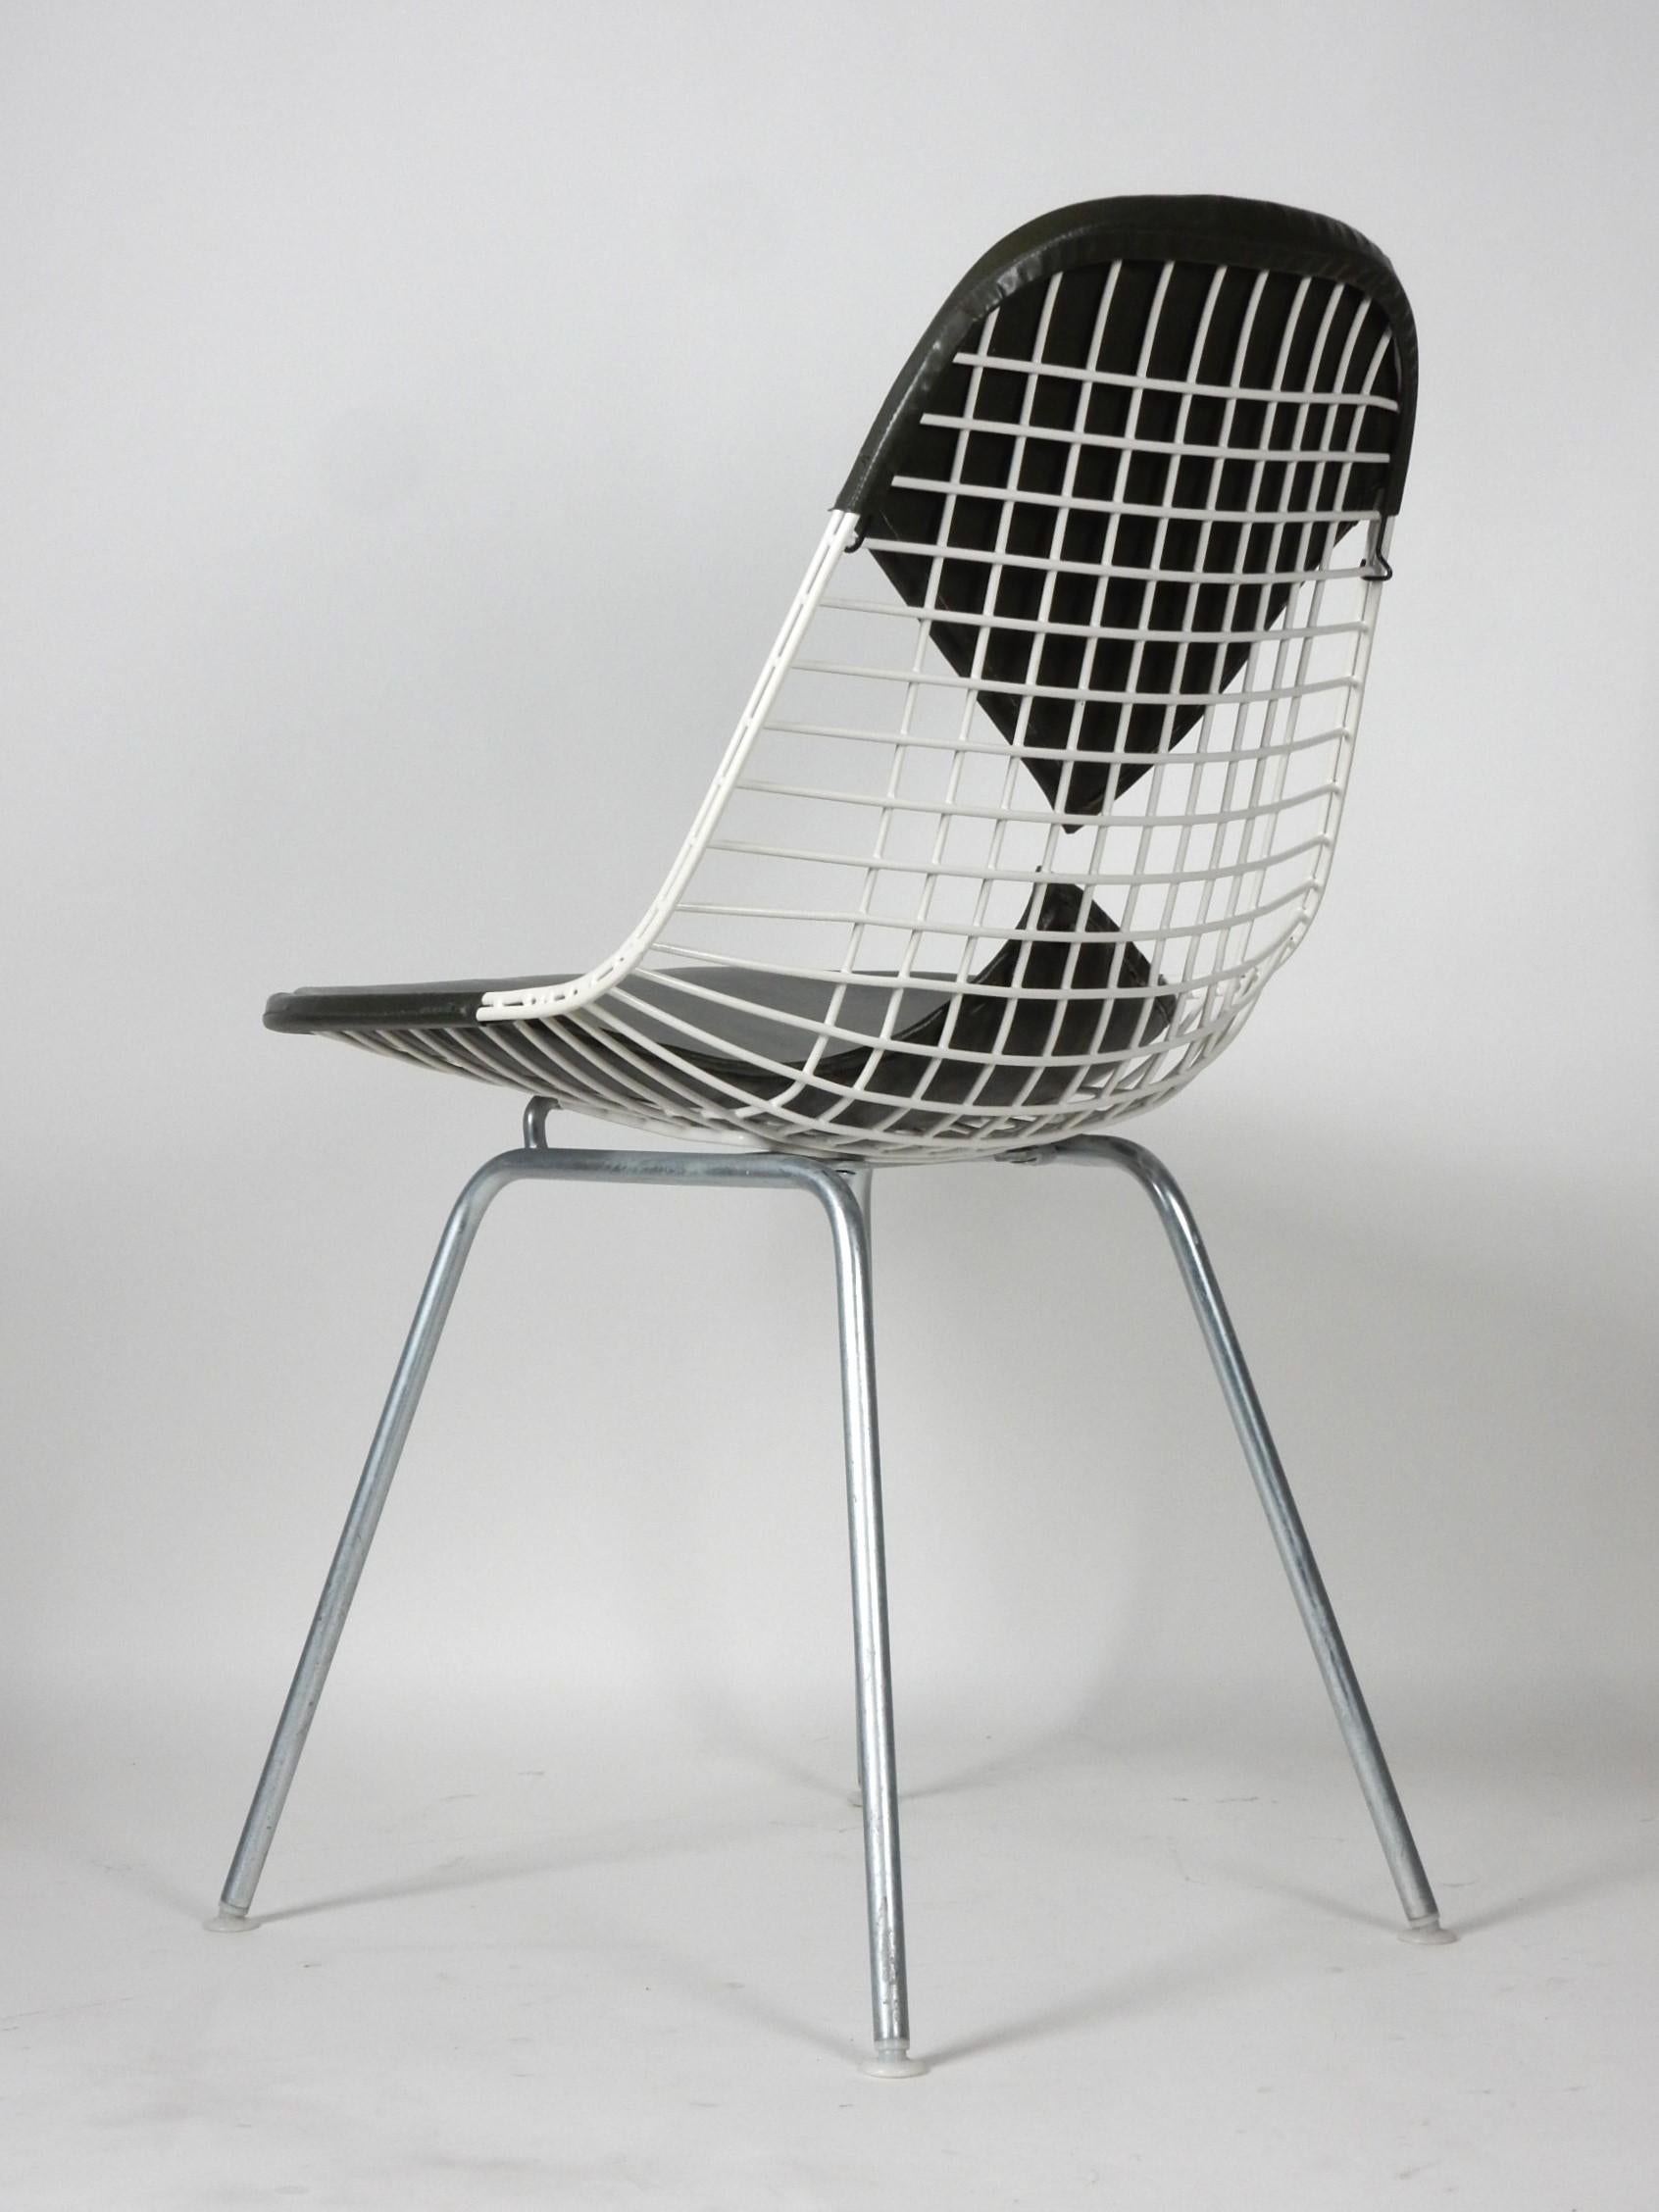 Original 1960's Herman Miller Charles & Ray Eames Bikini Wire Chairs set of 4 In Good Condition For Sale In Las Vegas, NV